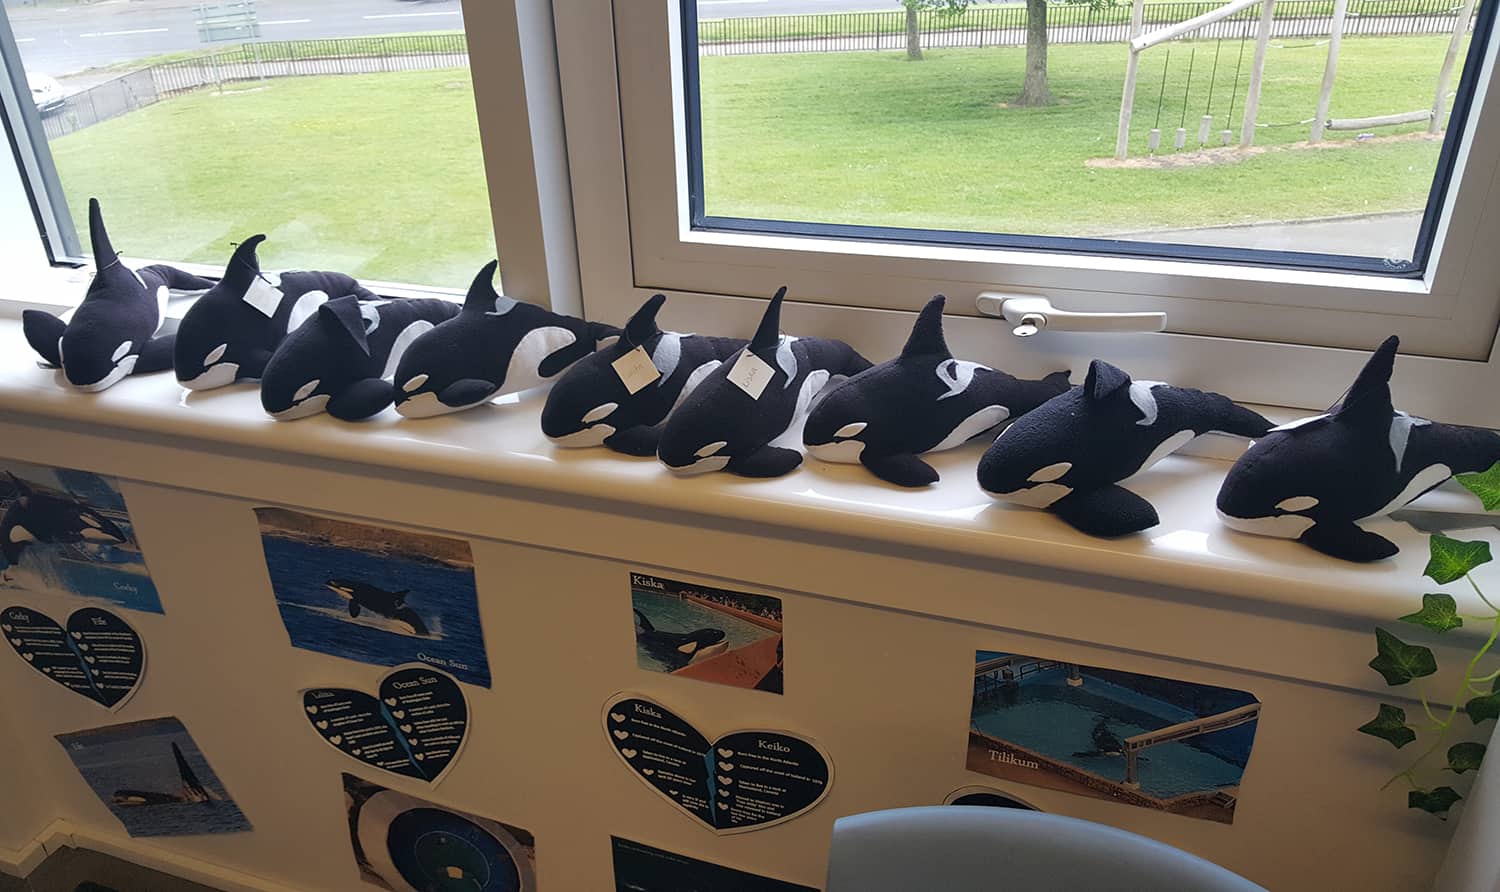 Fluffy replicas of captive orcas in the Sunnyside classroom - opposing the keeping of cetaceans in marine parks is on the agenda of the Sunnyside Ocean Defenders